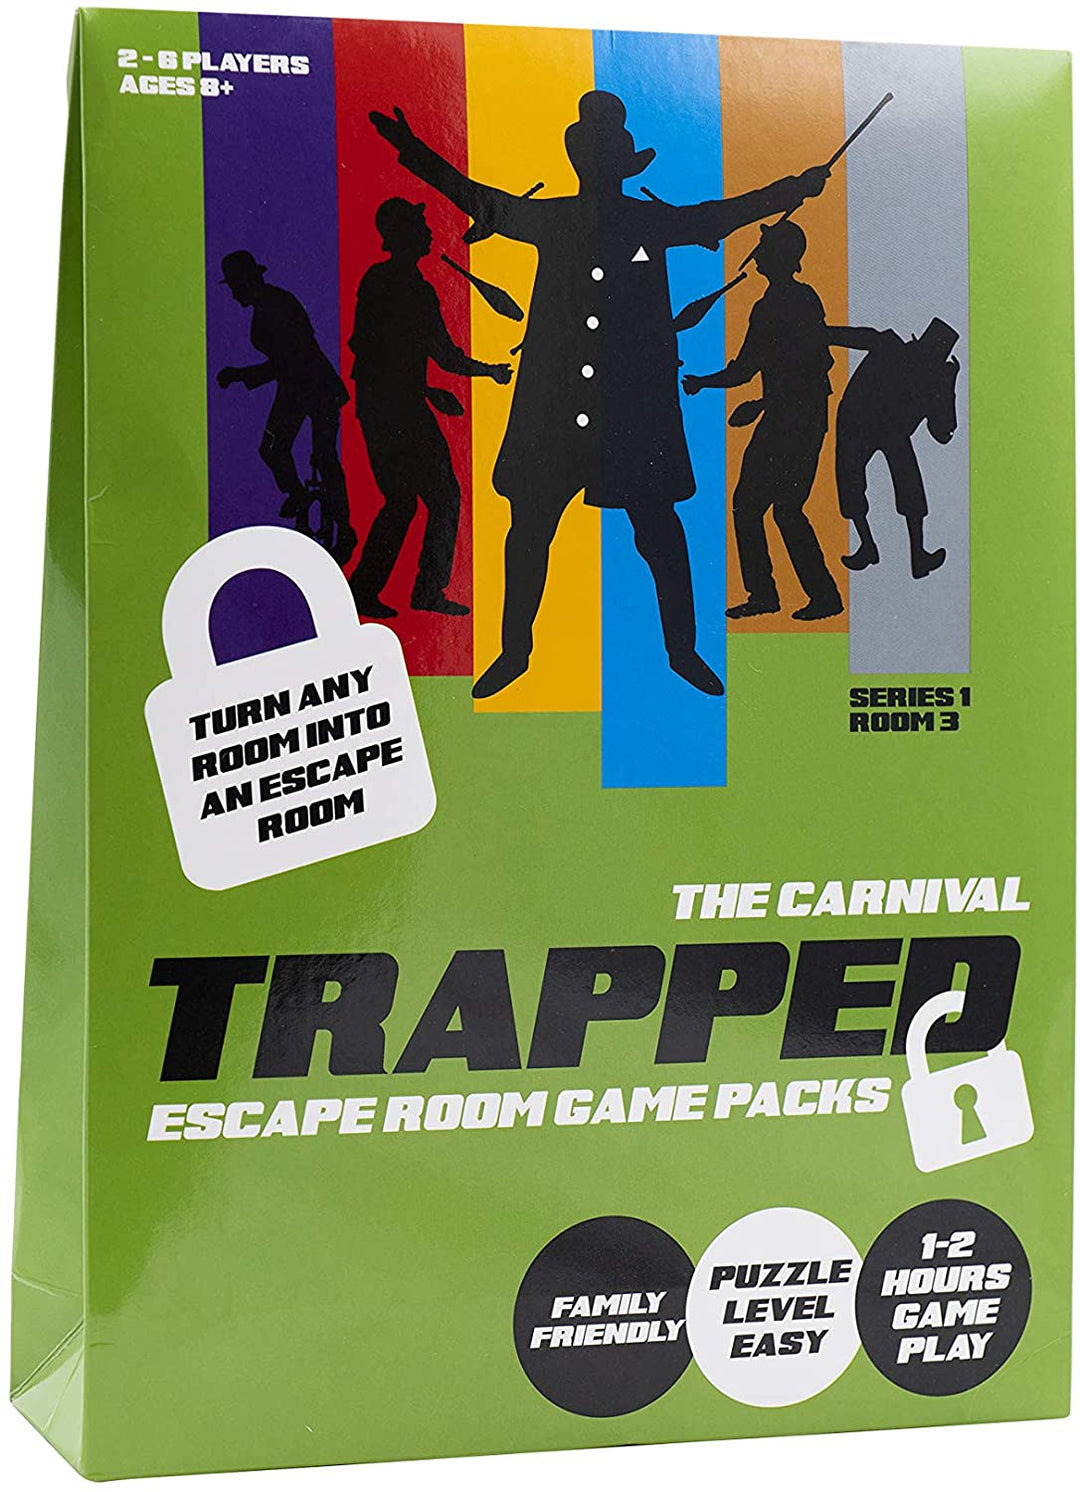 Trapped Escape Room Games CA001 Carnival, Turn Your Home into a Escape Room, No Waiting for Turns, Escape Room in a Box Kit, Solve puzzles & Clues with Friends and Family, Up to 6 Players, Age 8+